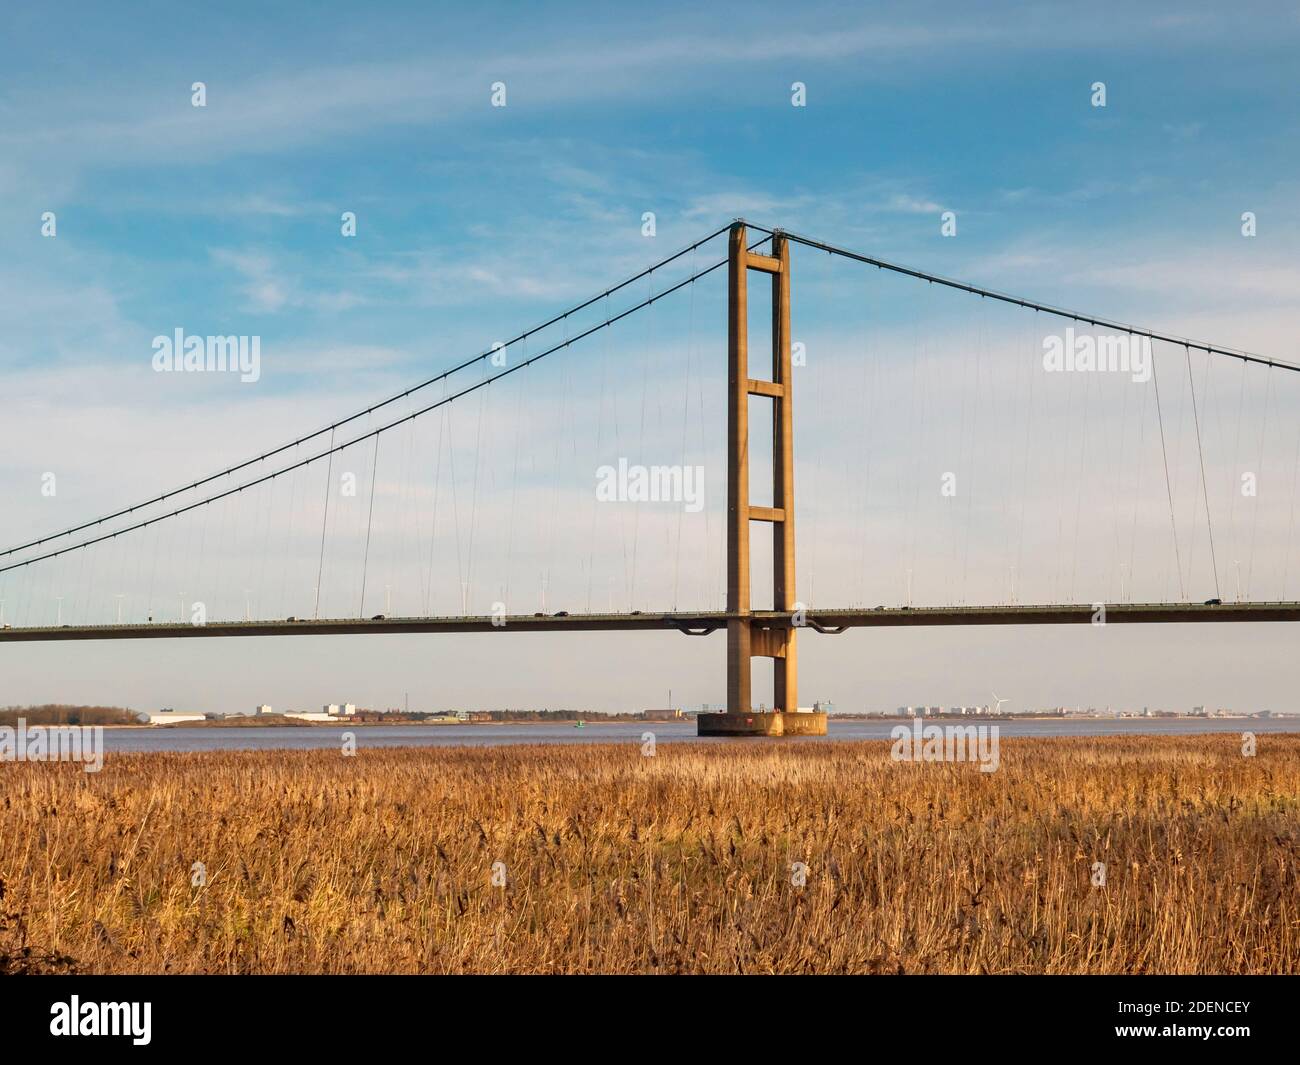 A tower and section of the Humber Bridge seen across a reed bed in North Lincolnshire, England Stock Photo